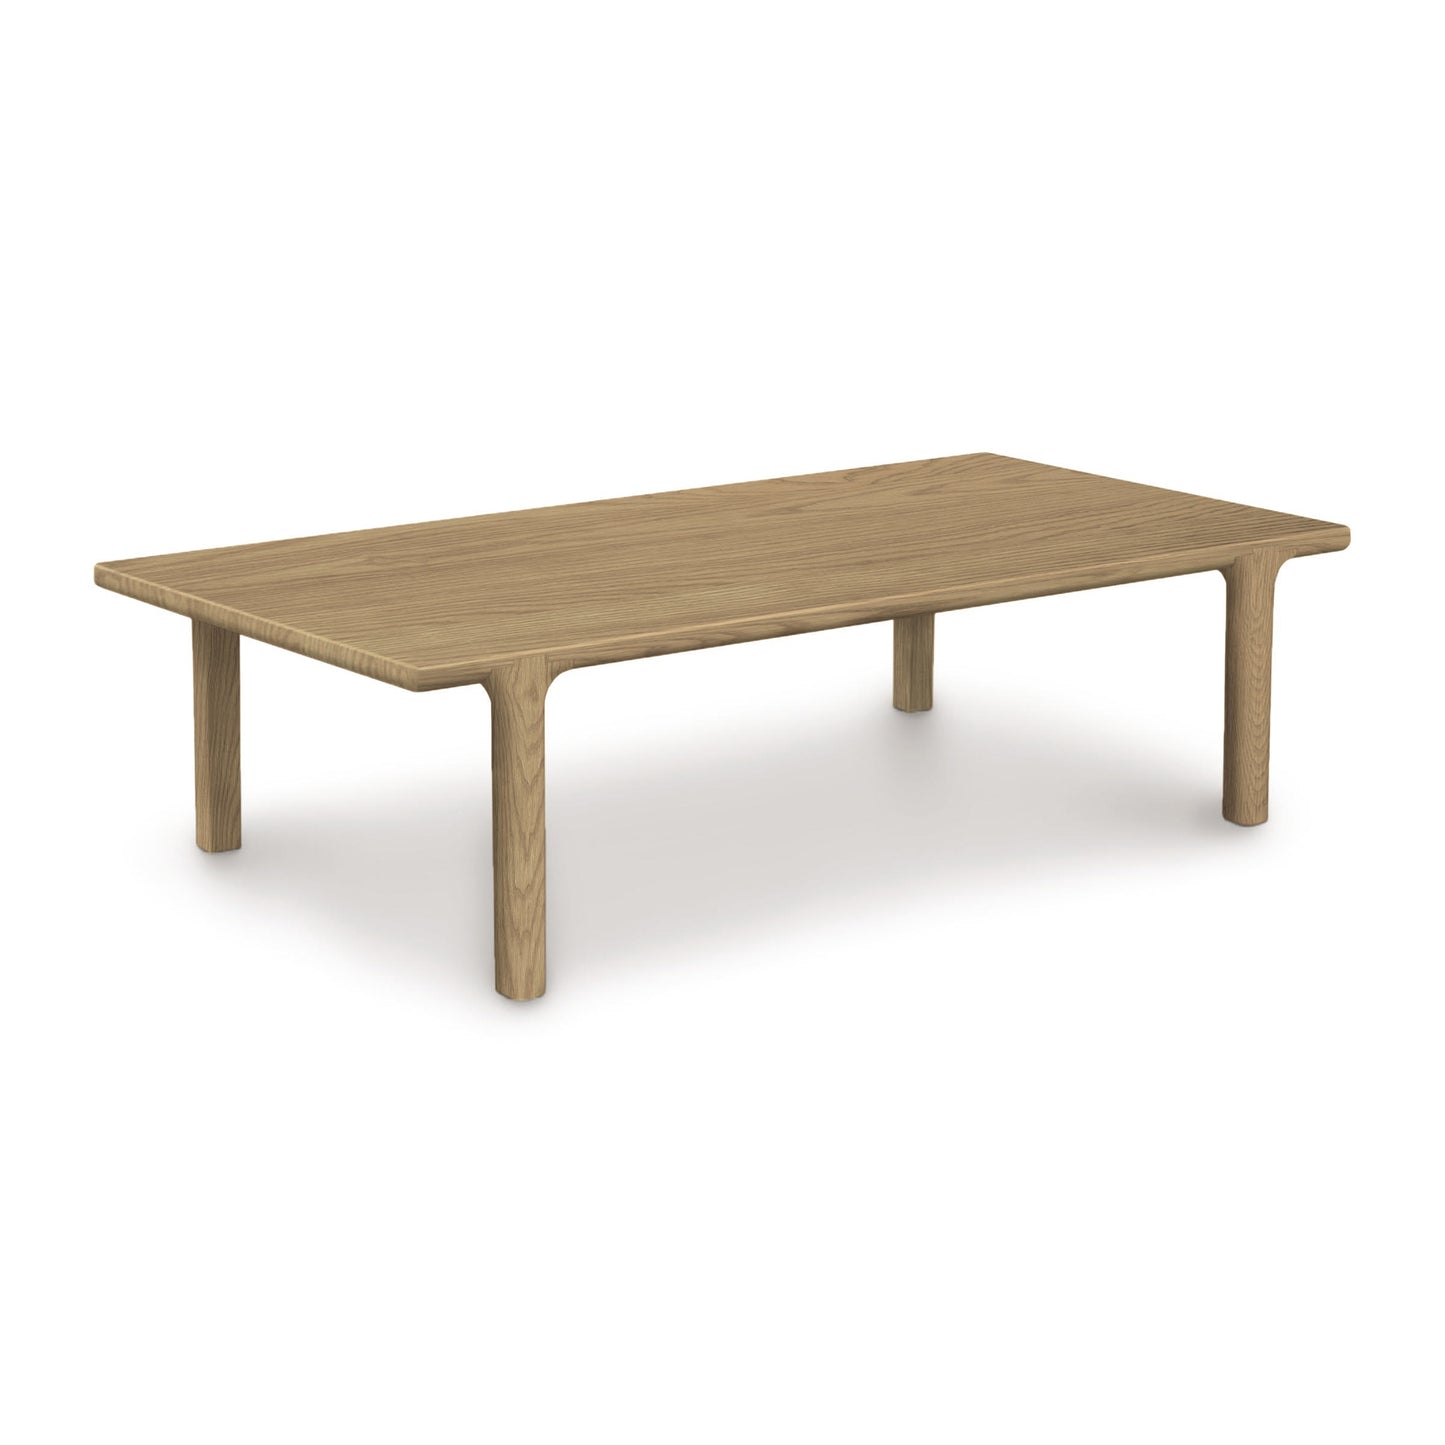 A Sierra Rectangular Coffee Table by Copeland Furniture on a white background featuring wood finishes.